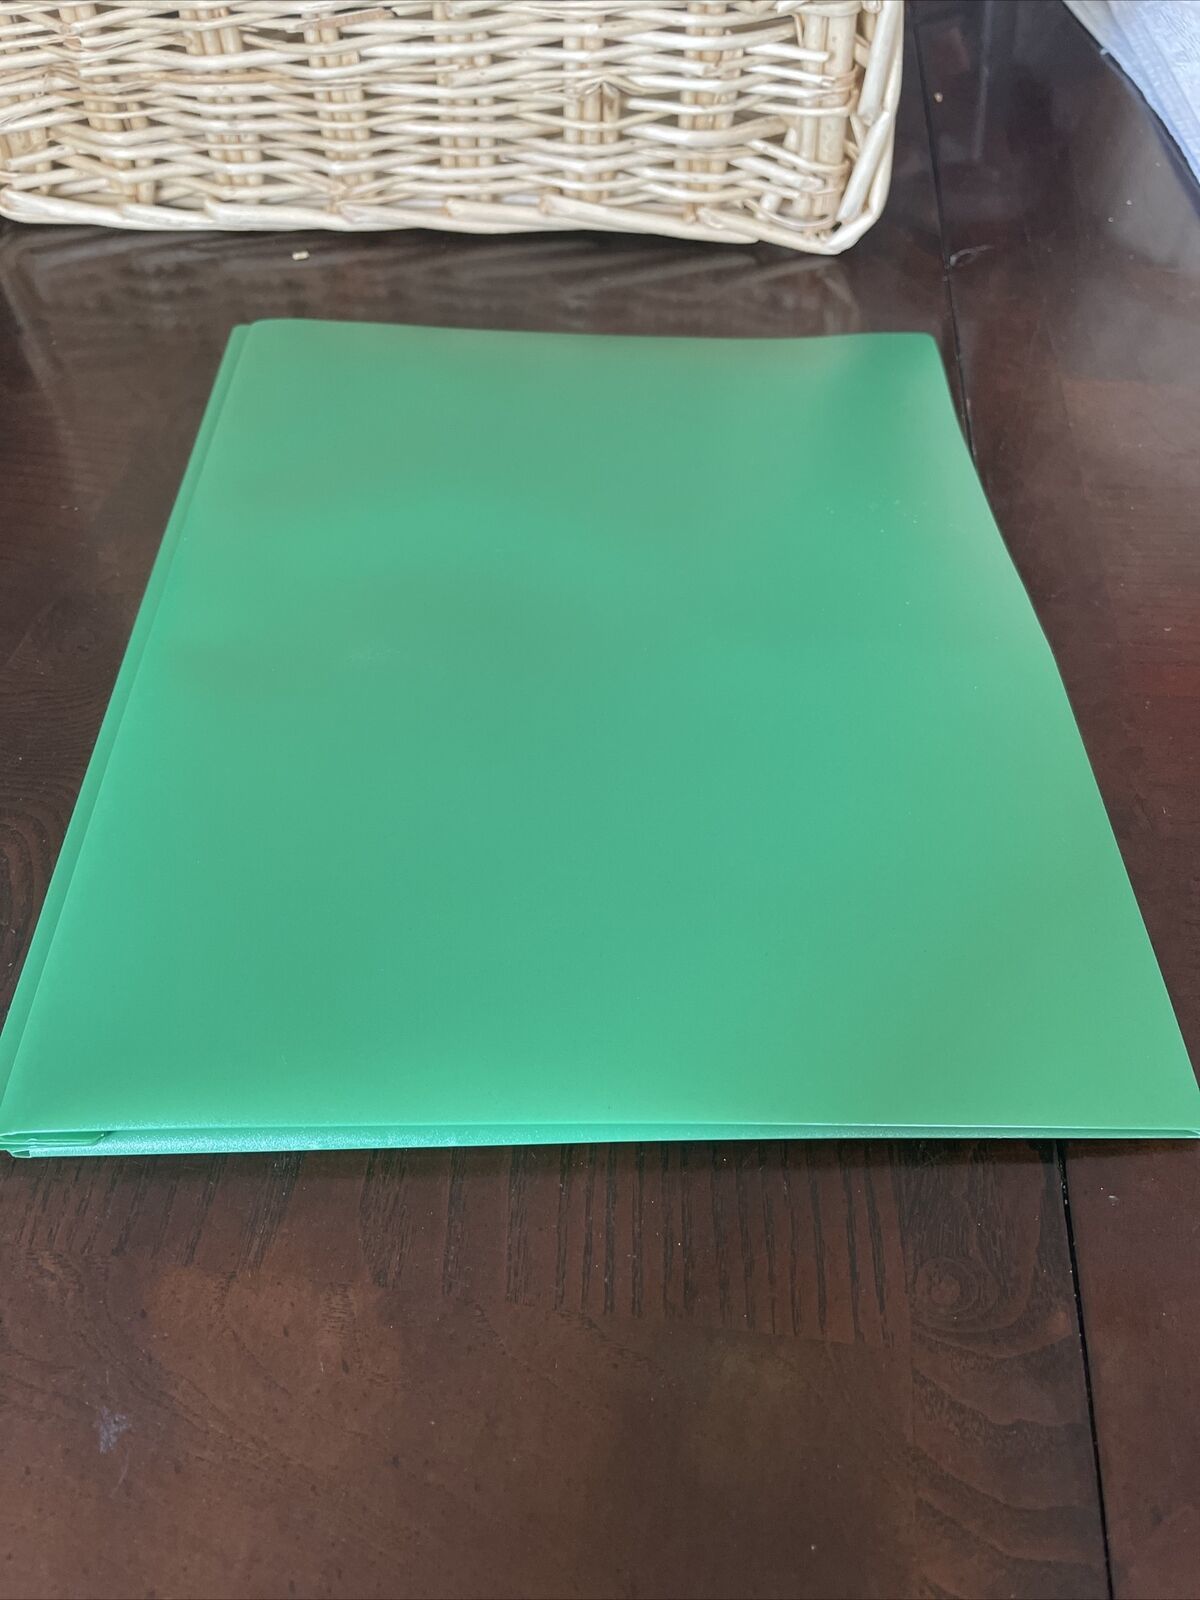 Primary image for 1 Green office depot folder quality - brand new